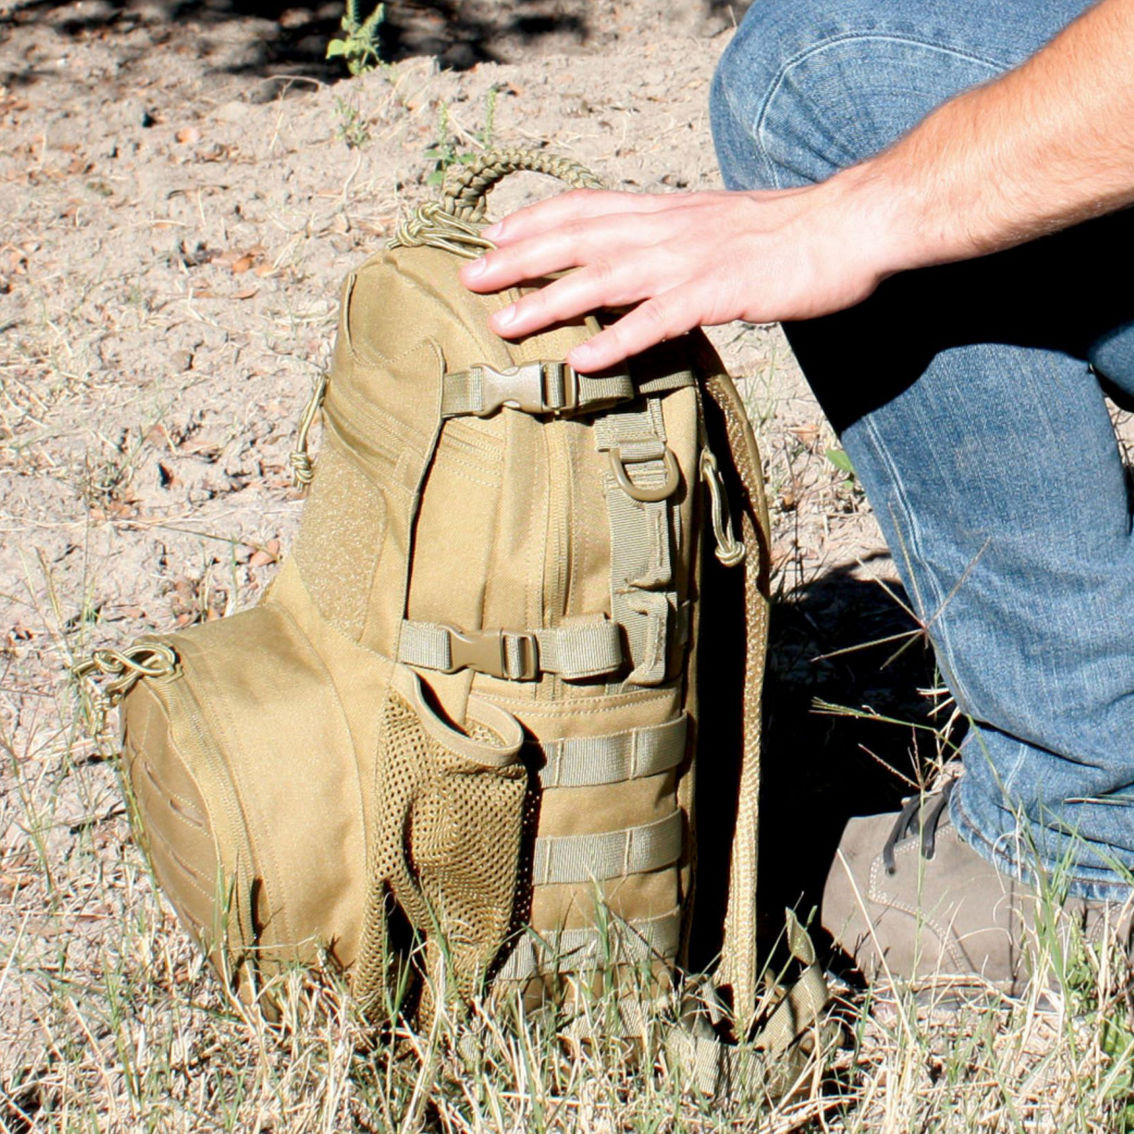 Red Rock Outdoor Gear Ambush Pack - Image 8 of 8